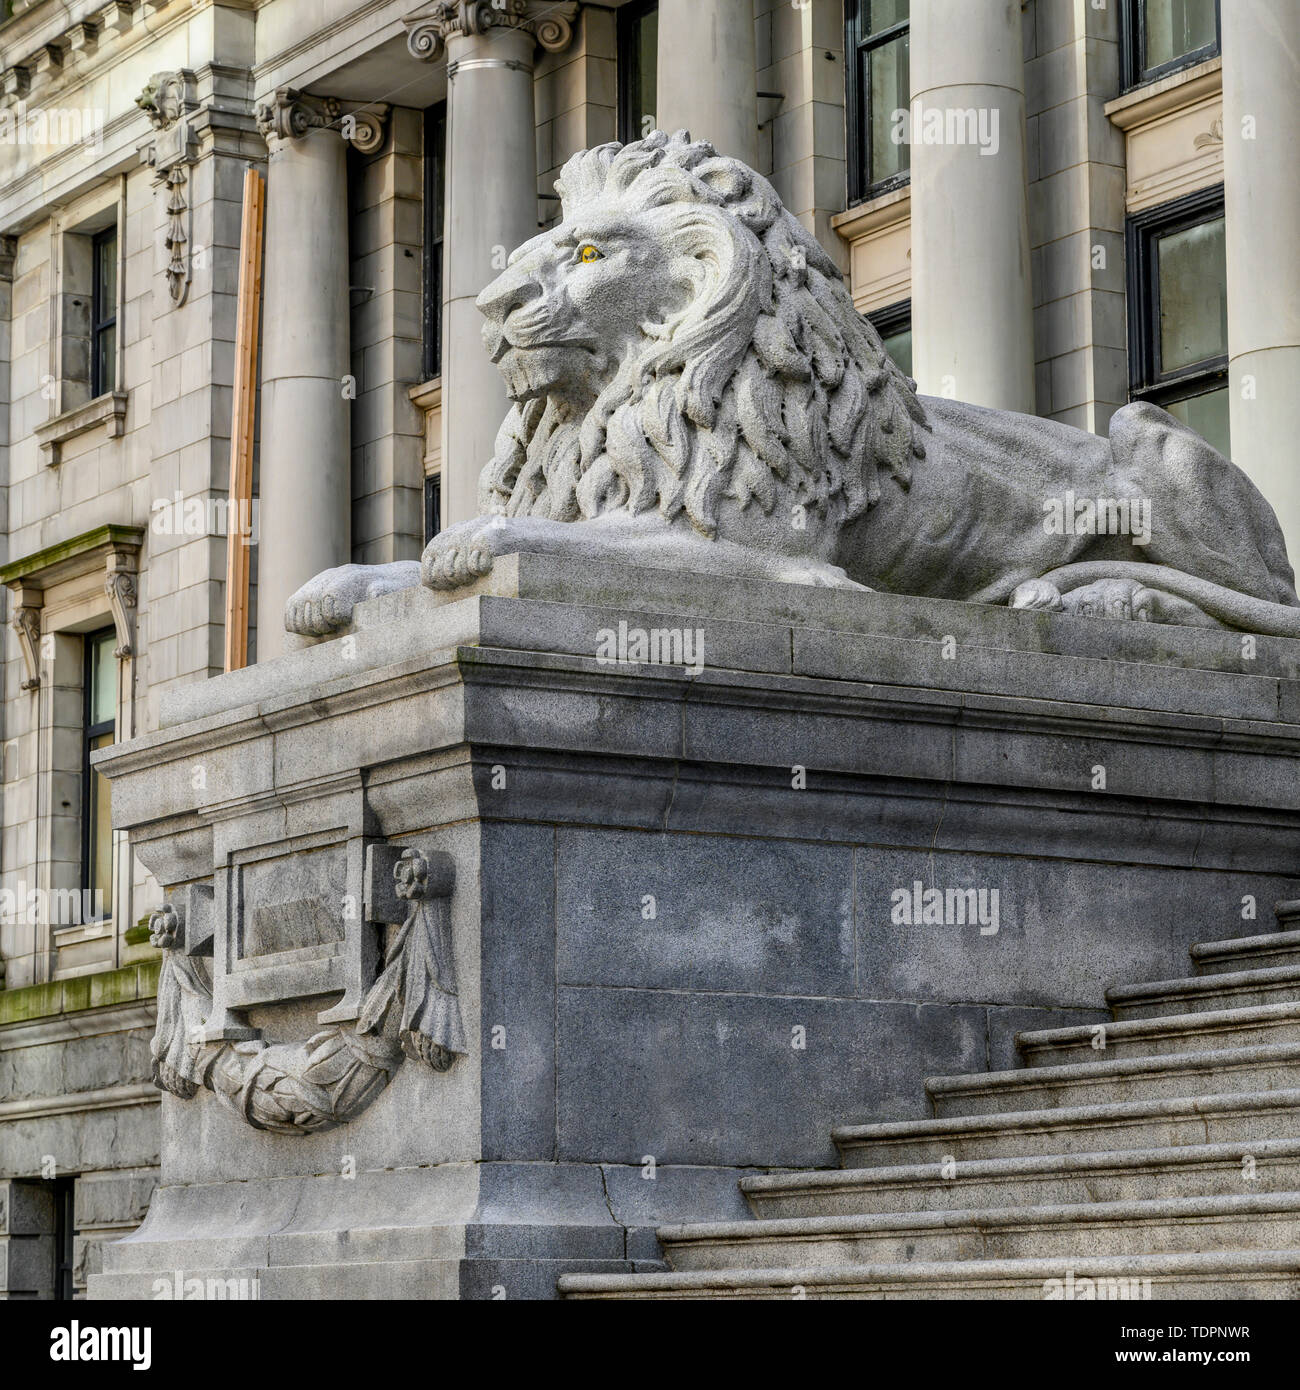 Lion statue outside Vancouver Art Gallery beside steps; Vancouver, British Columbia, Canada Stock Photo